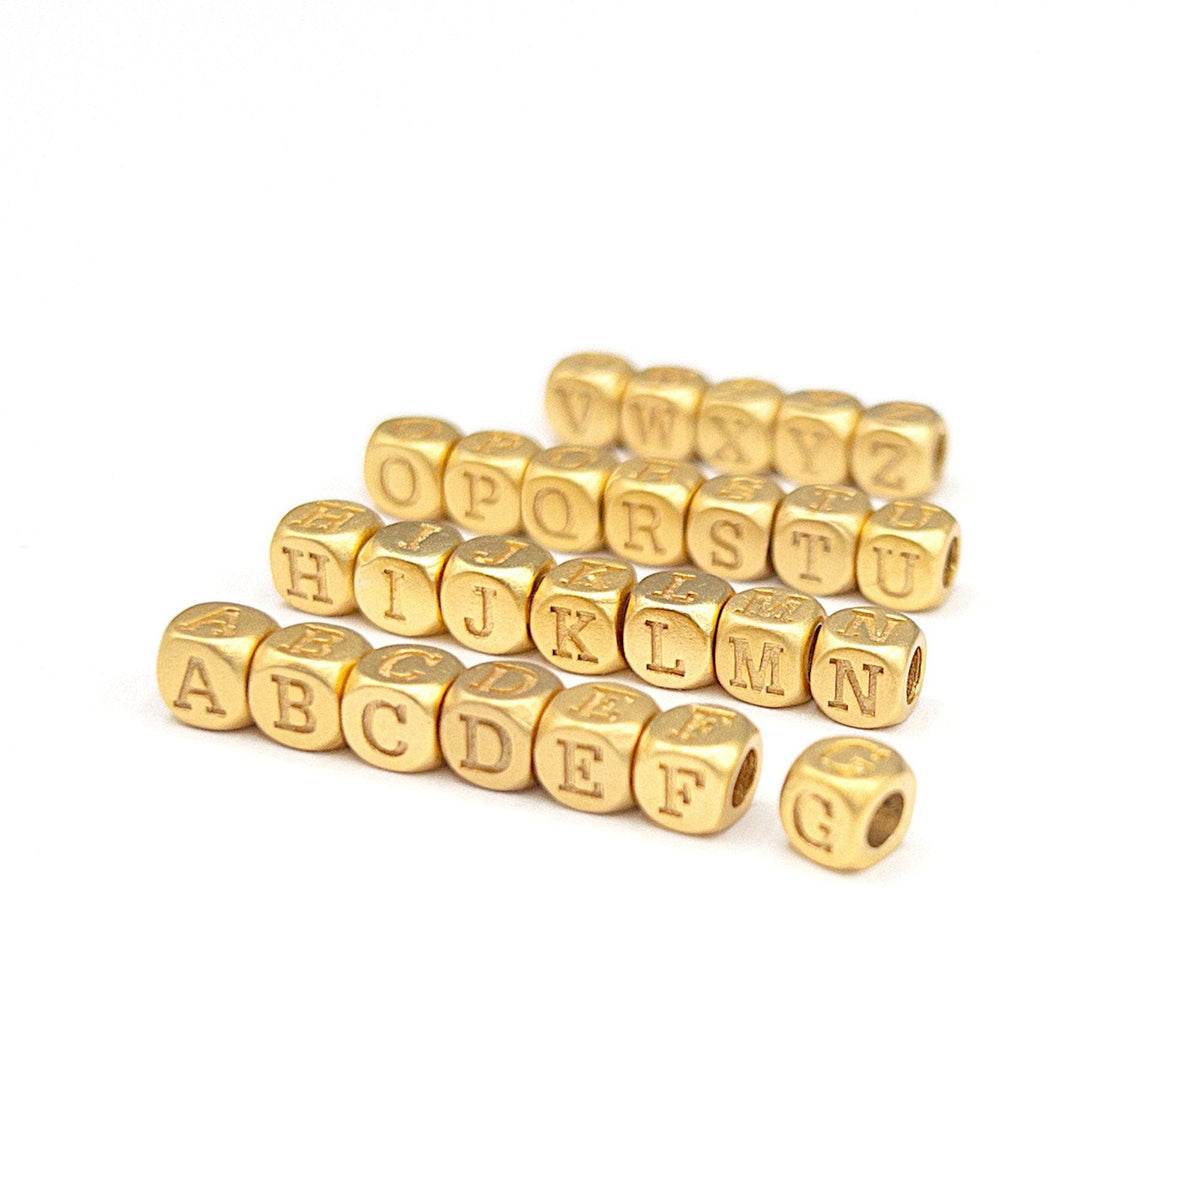 Alphabet Beads, 4.5mm Gold Letter Cube Beads, Tiny Initial Beads